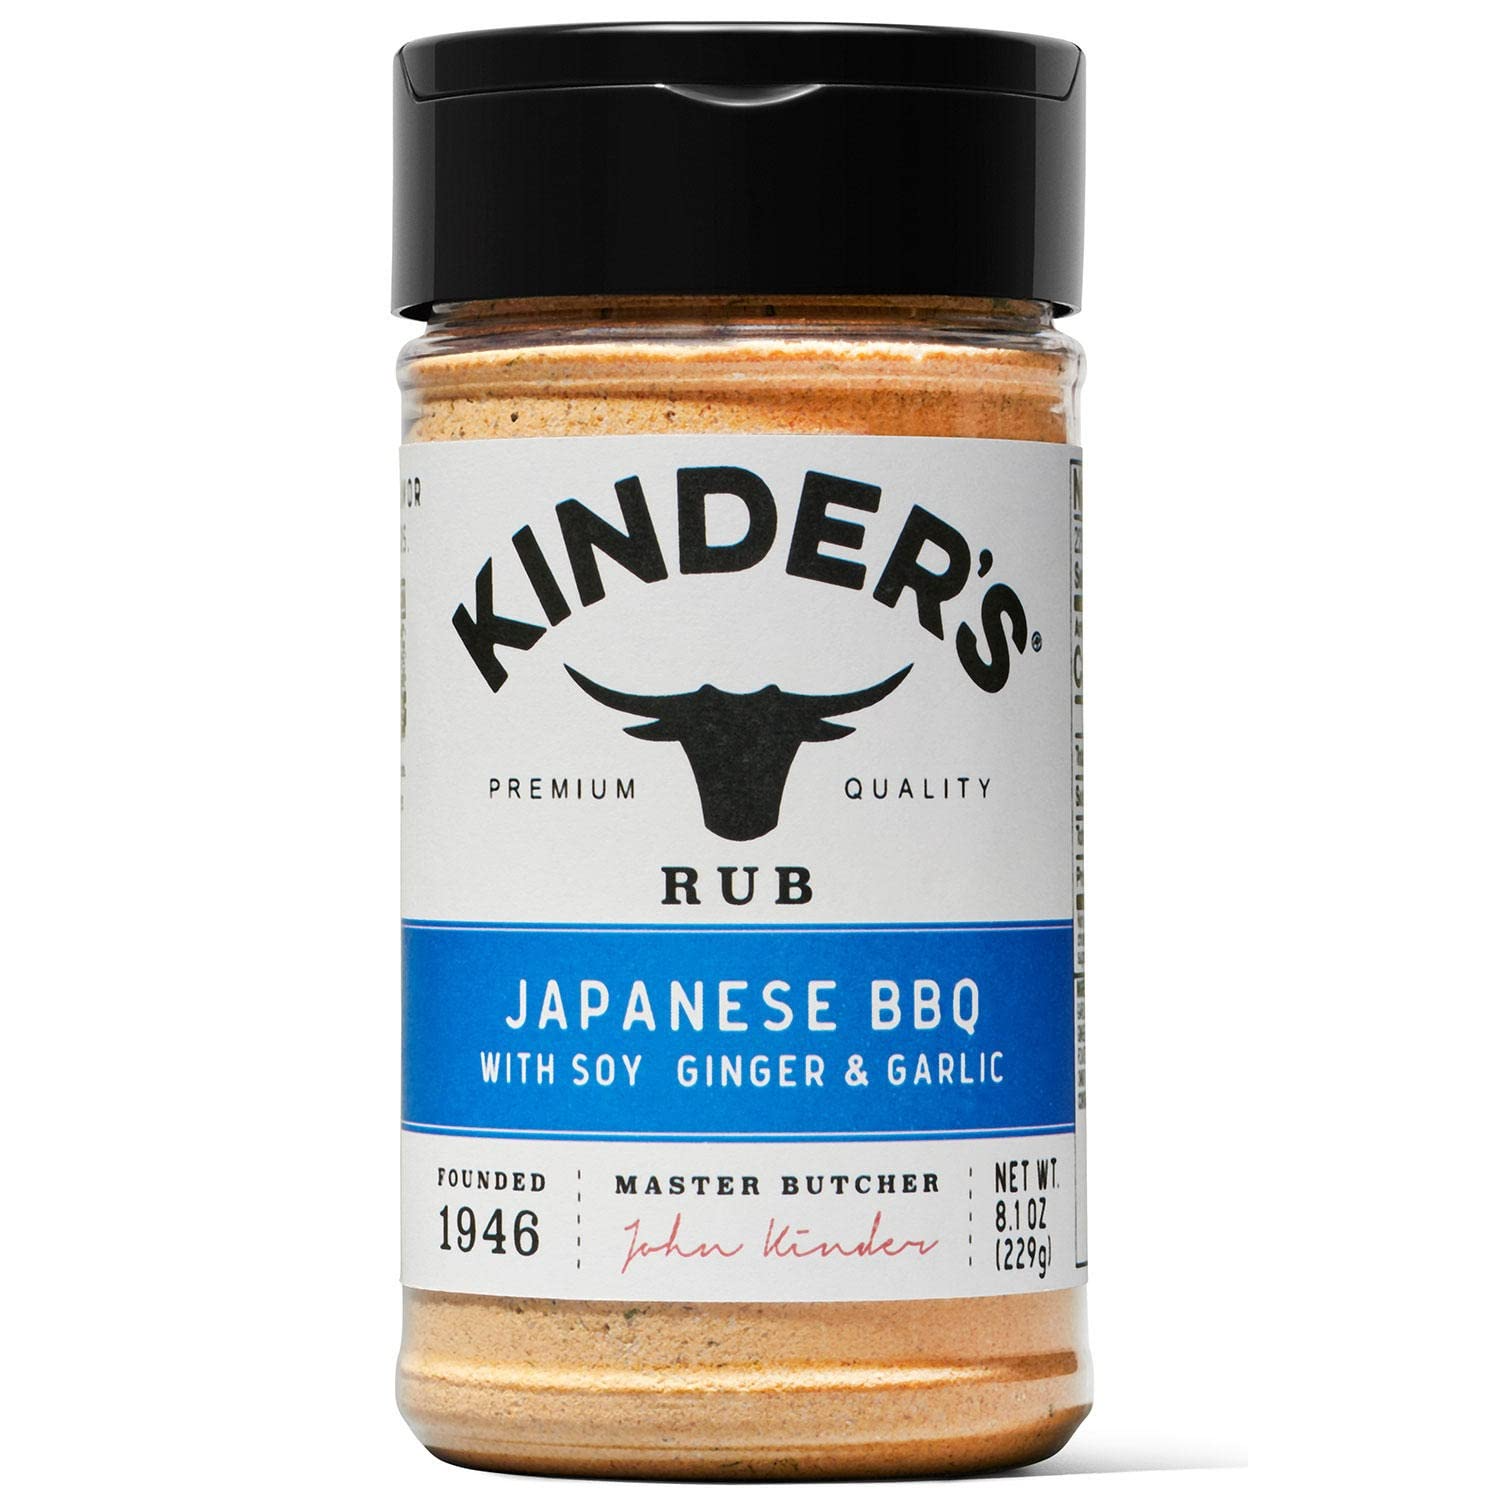 Kinder's Japanese BBQ Rub and Seasoning (8.1 Ounce) - Barbecue Whizz...Watch My Smoke!